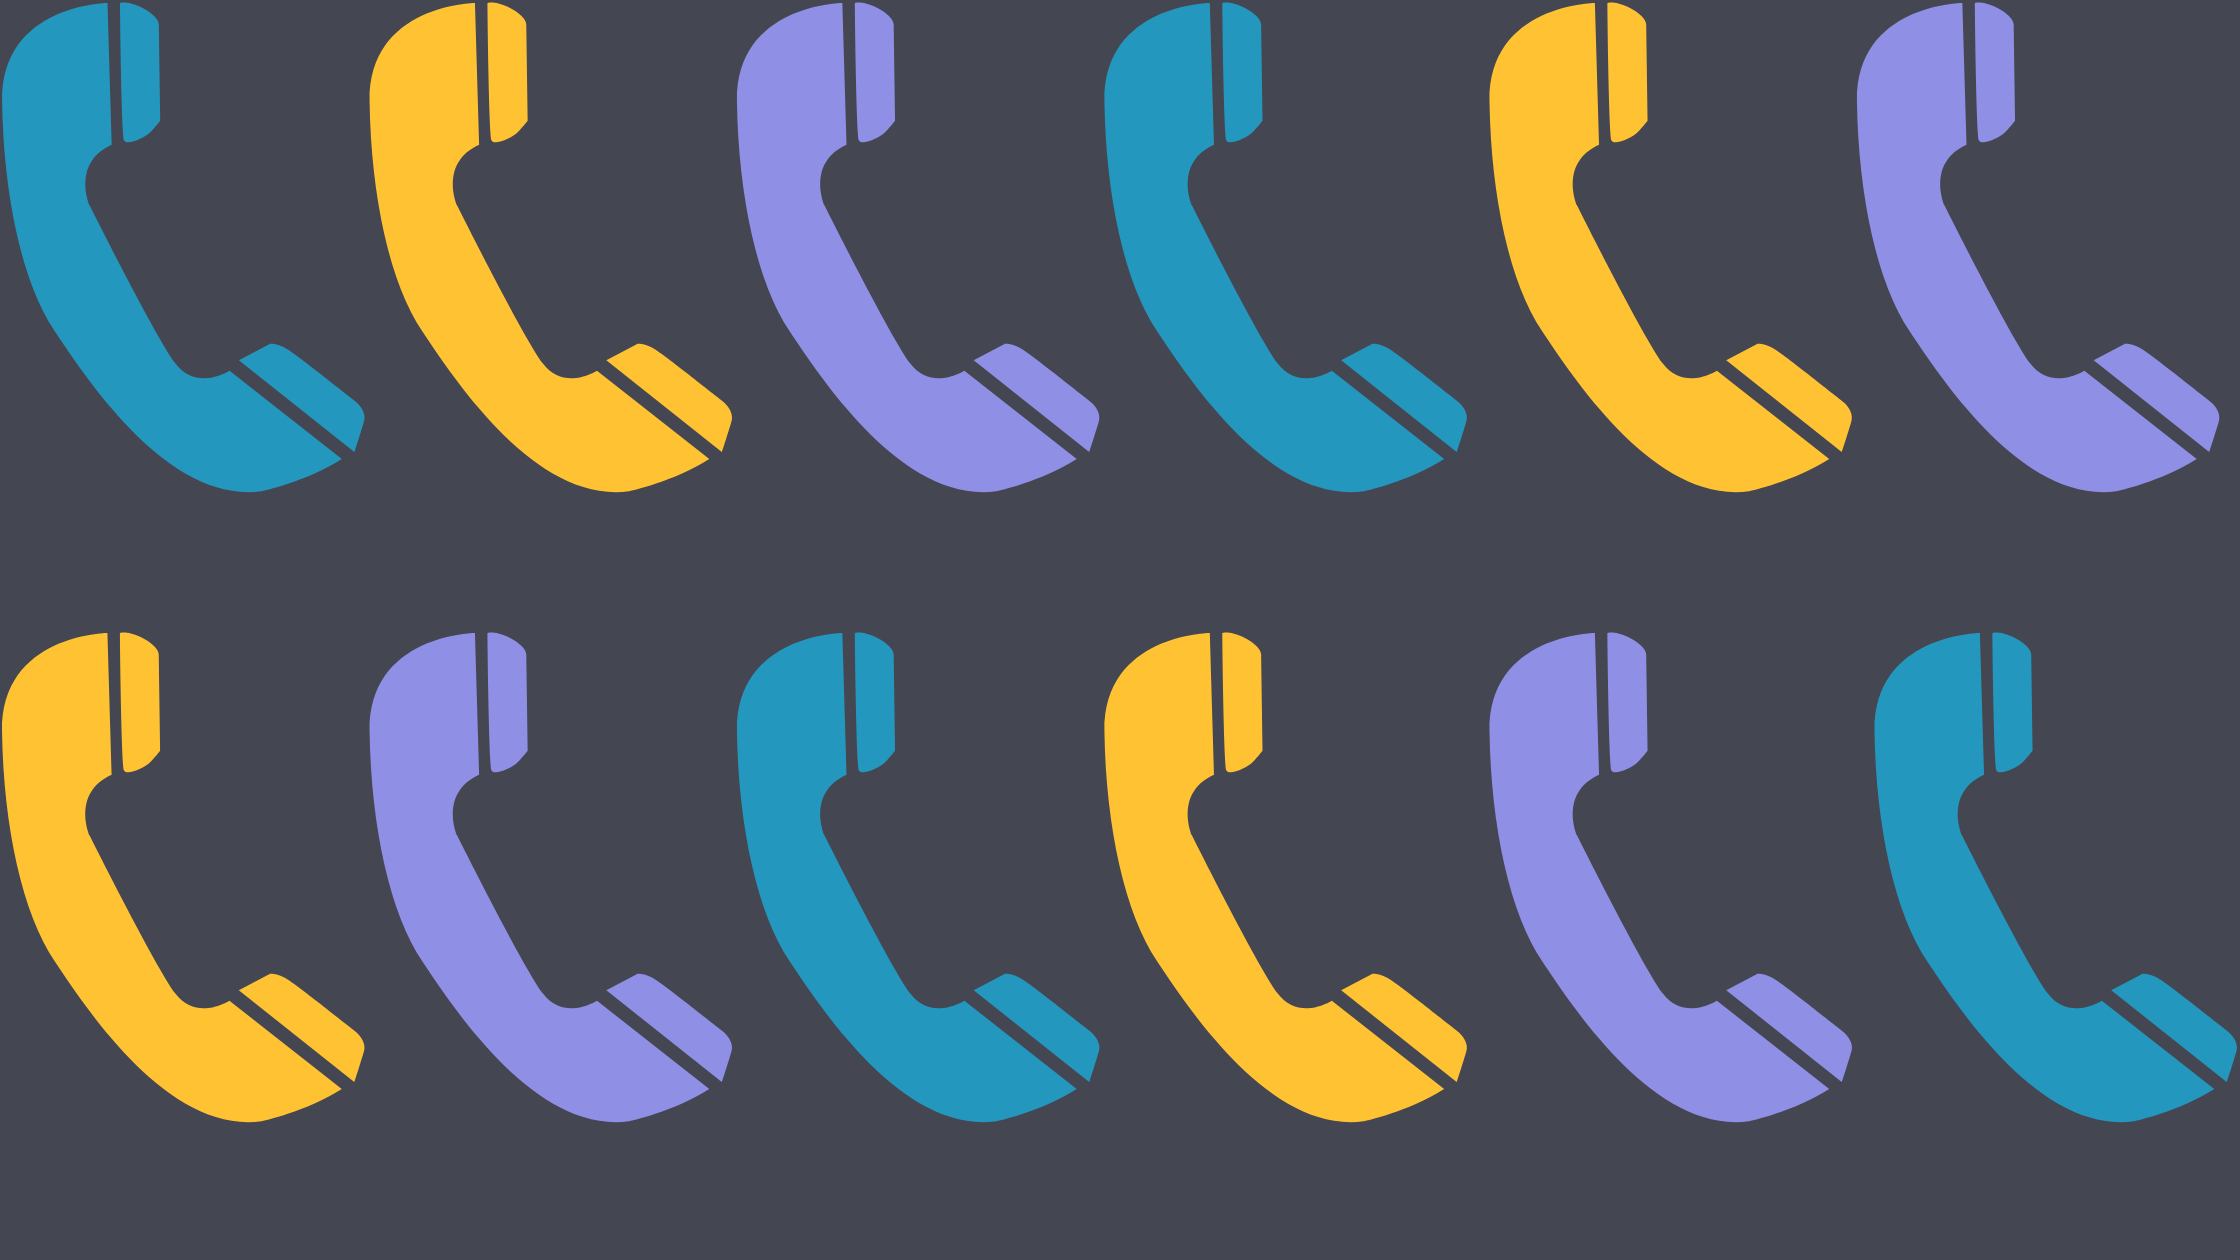 A pattern of phone icons in different colors